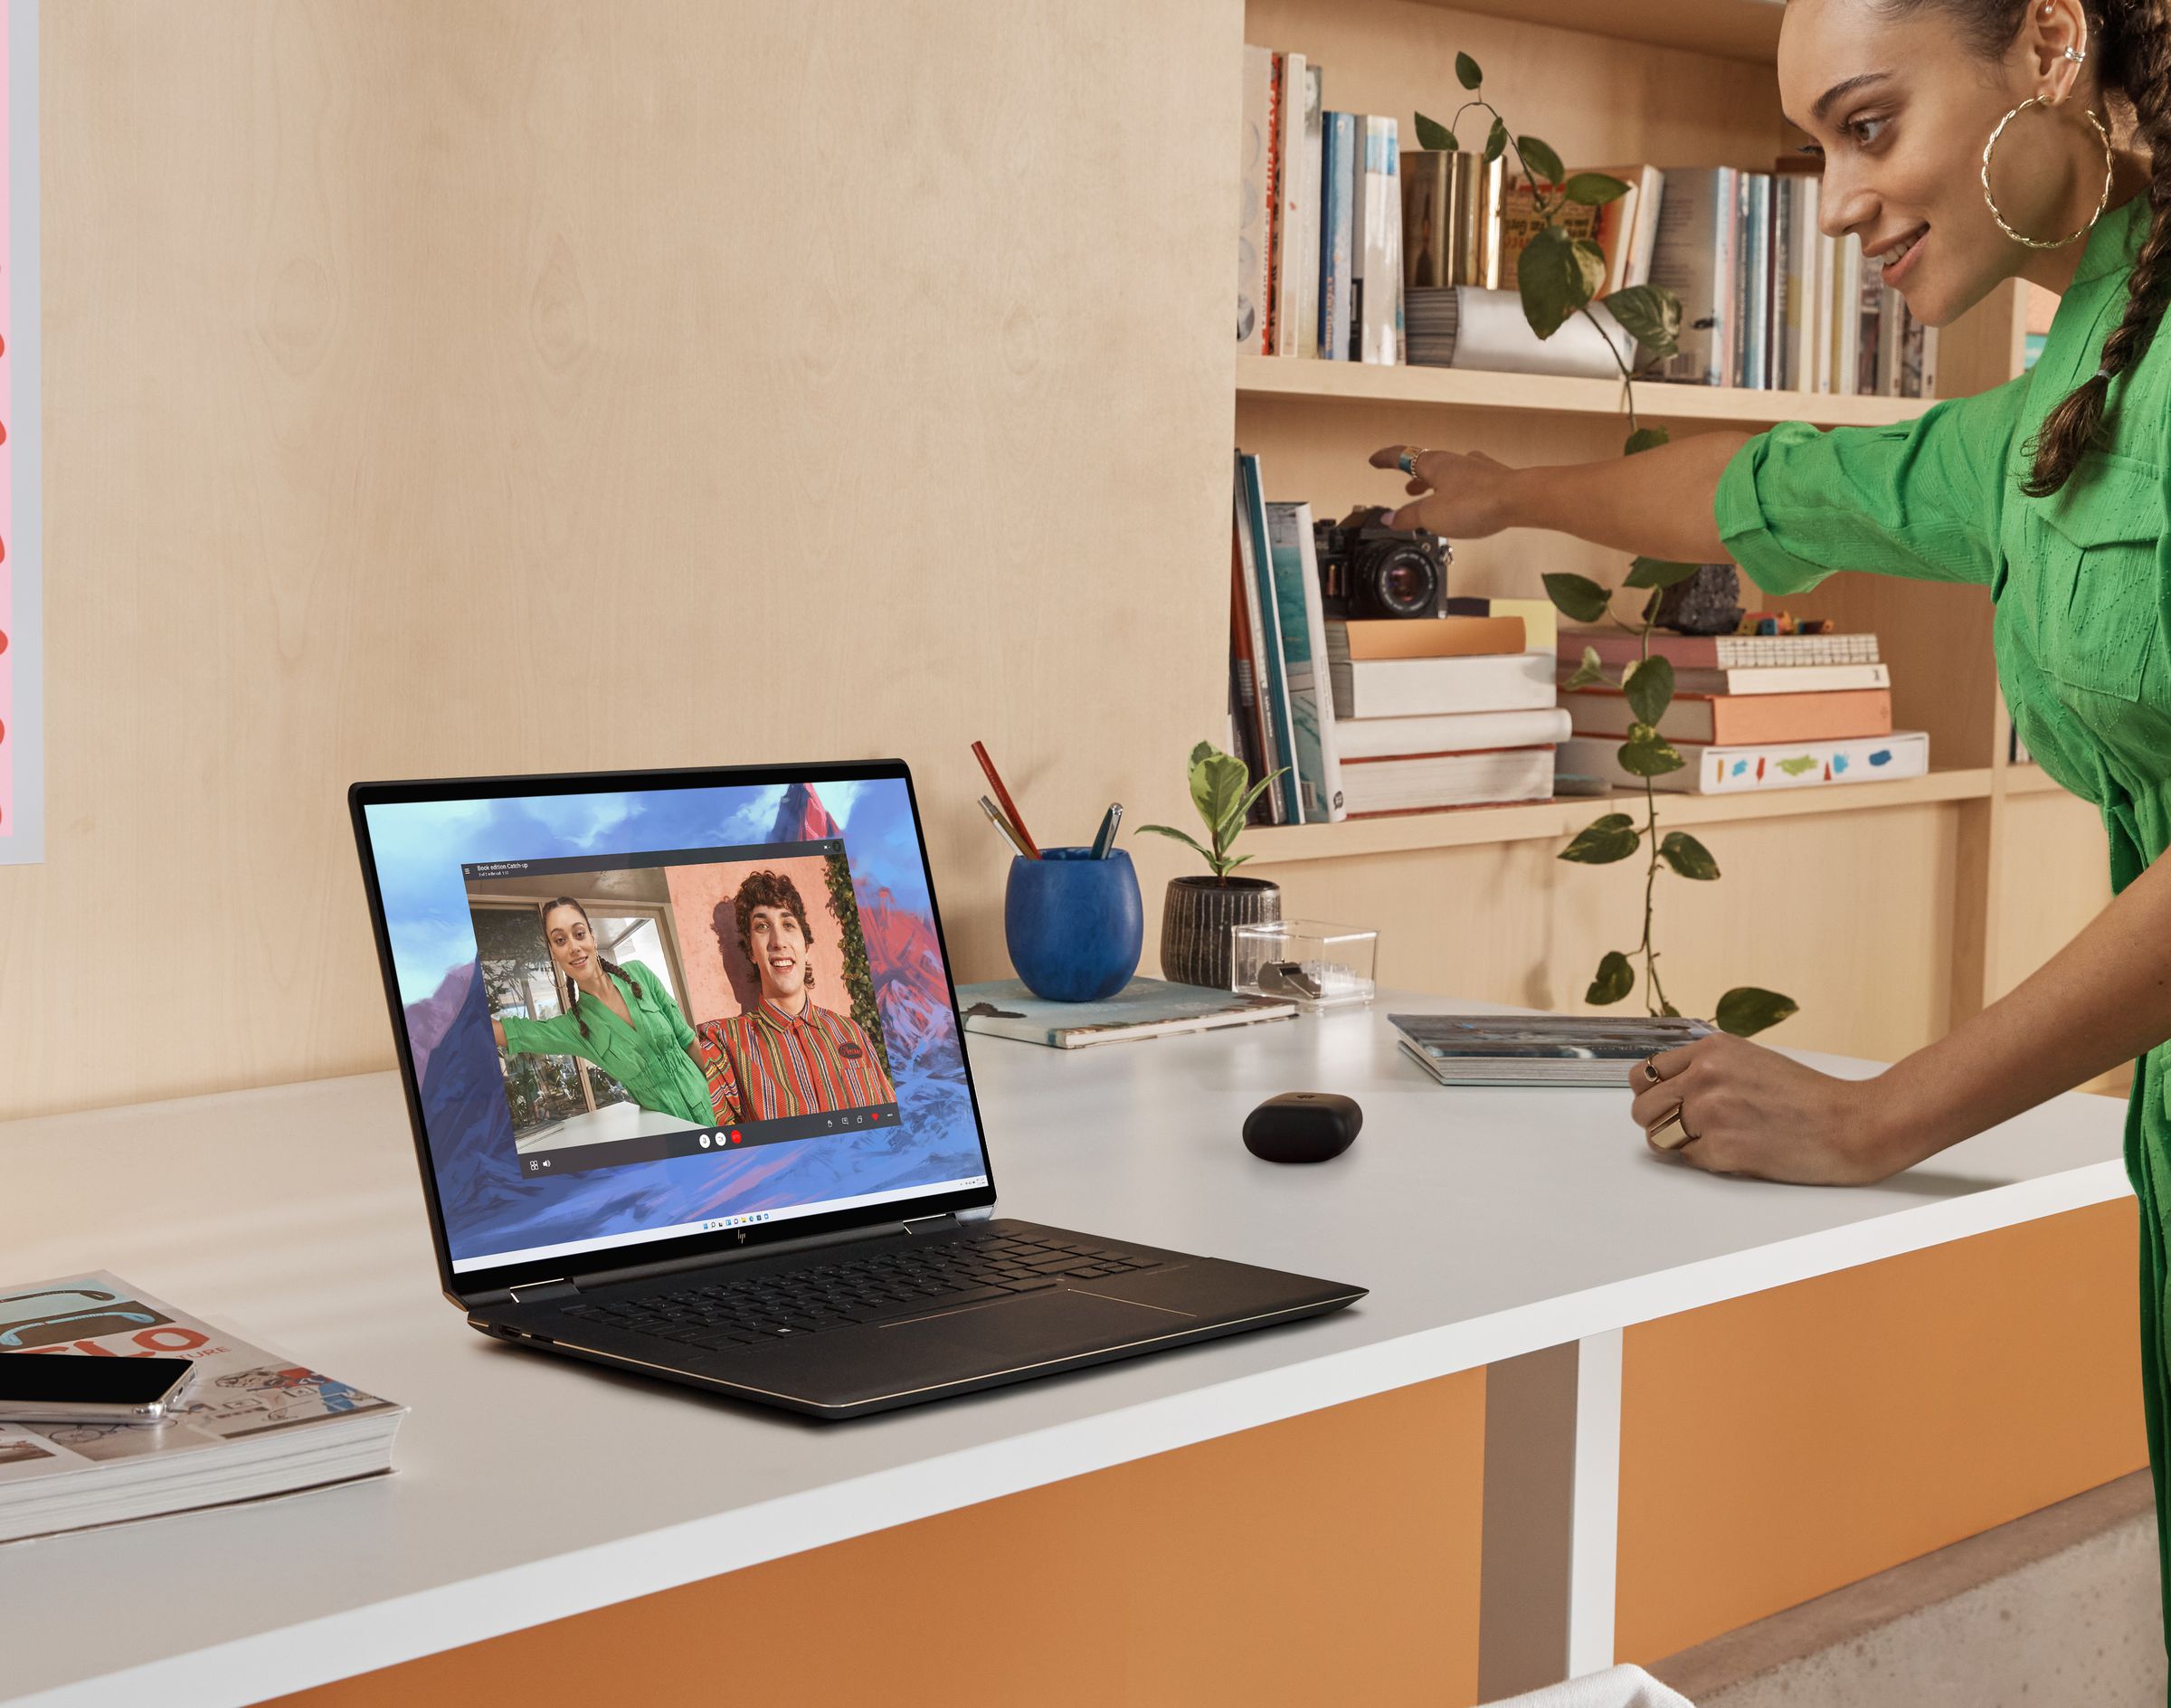 A user participates in a video call on the HP Spectre x360 16, pointing to the right. The laptop sits on a white desk. To its left are a book and a smartphone. To its right are a small potted plant, an earbuds case, a pencil case, and a full bookcase.